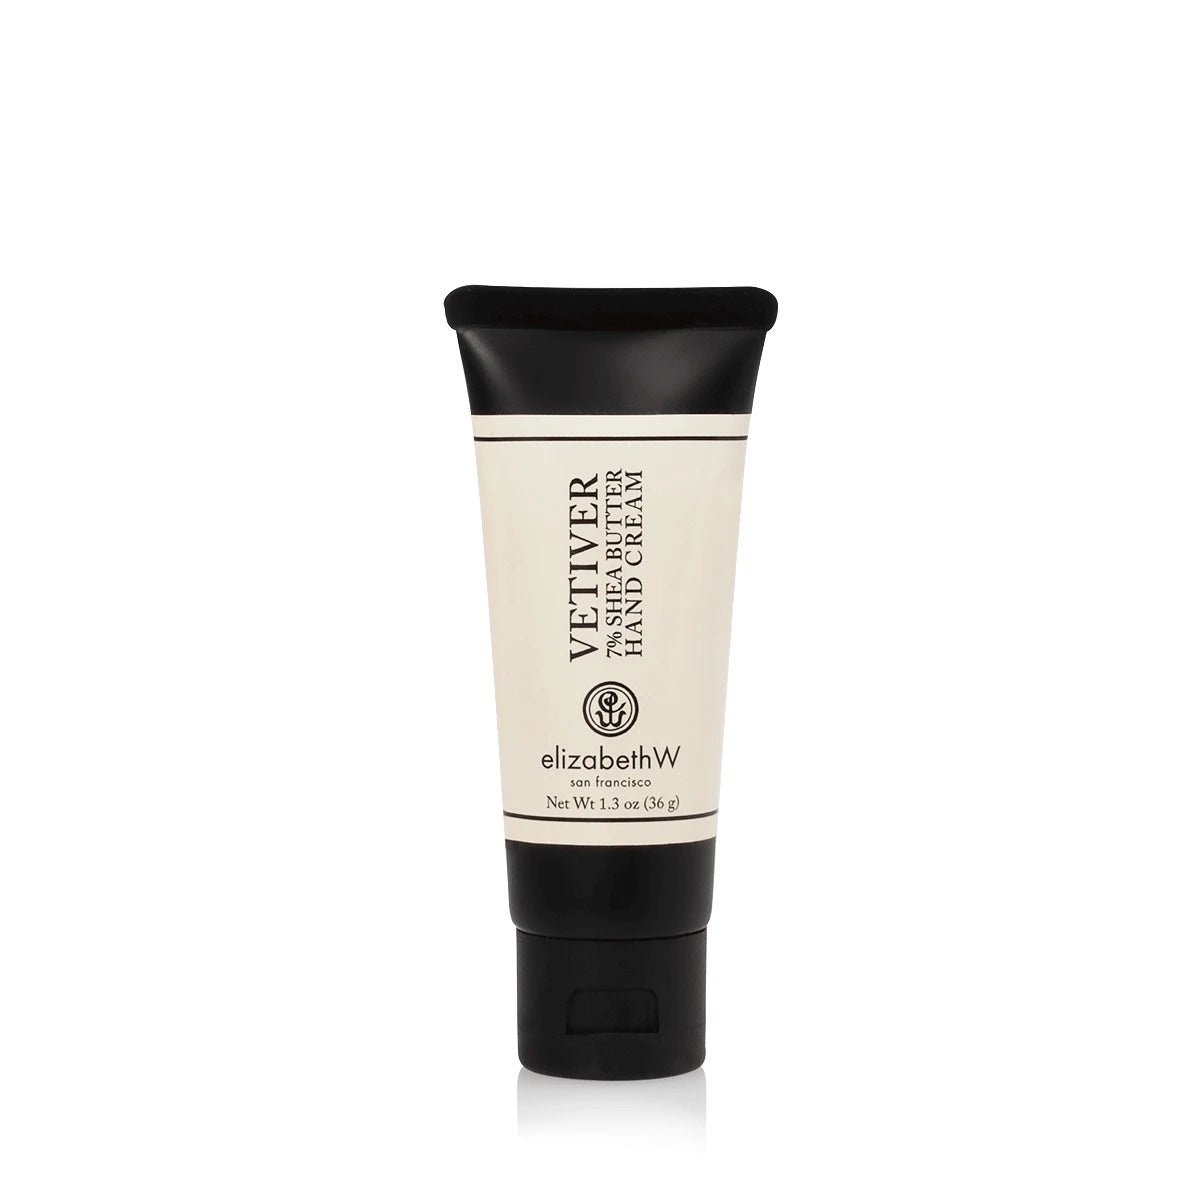 A single, upright tube of elizabeth W Signature Vetiver Mini Hand Cream on a plain white background, clearly displaying the product label.